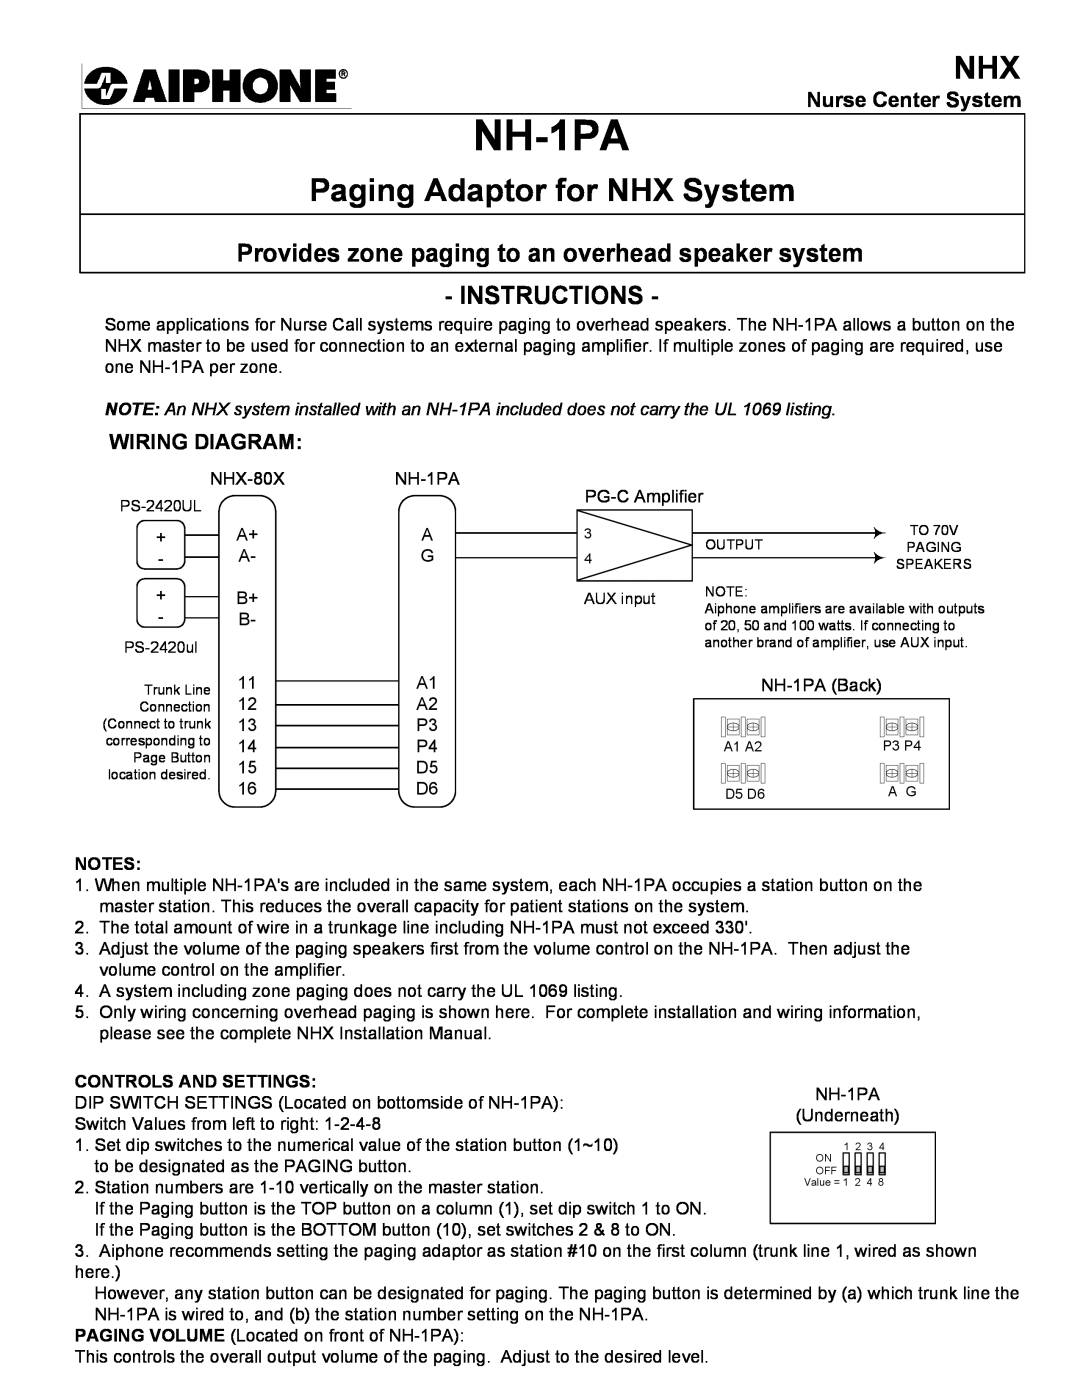 Aiphone NH-1PA installation manual Nurse Center System, Wiring Diagram, Paging Adaptor for NHX System, Instructions 